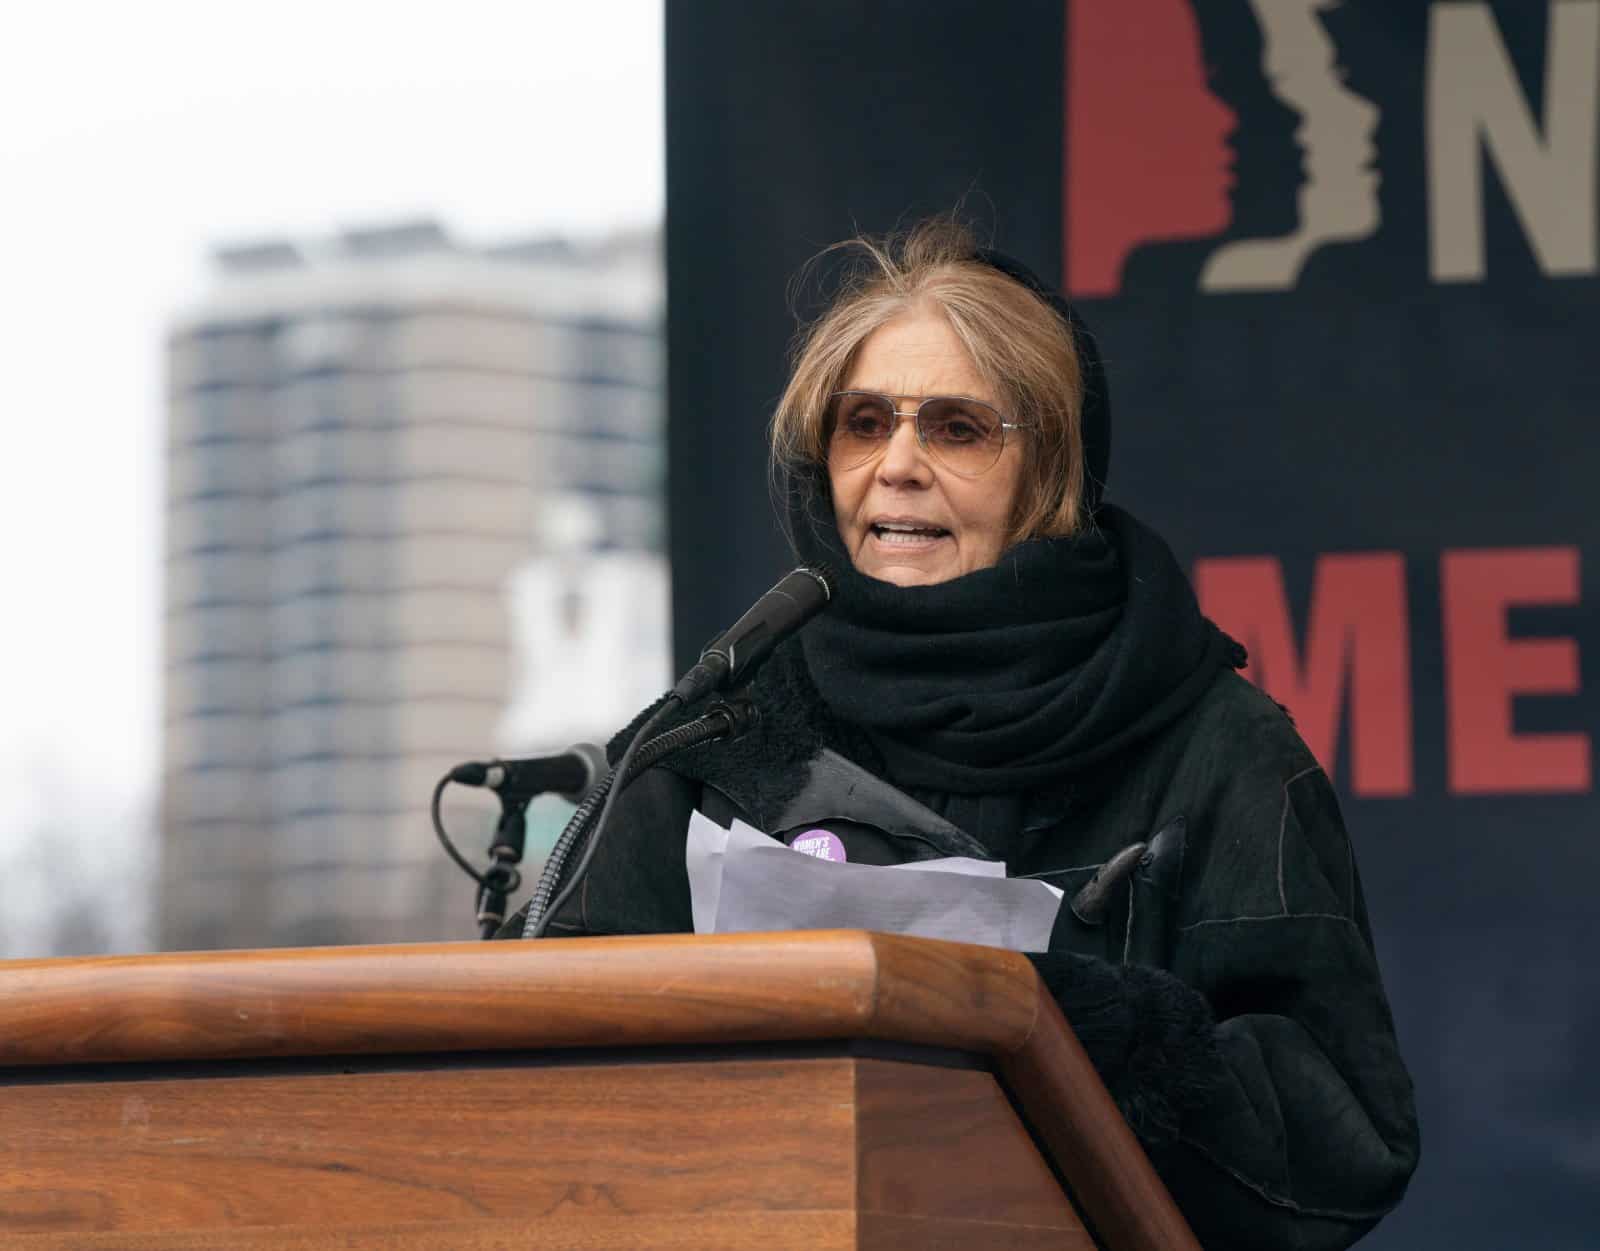 Image Credit: Shutterstock / lev radin <p><span>Gloria Steinem has been a leading voice in the American feminist movement since the late 1960s, co-founding both New York Magazine and Ms. magazine.</span></p>